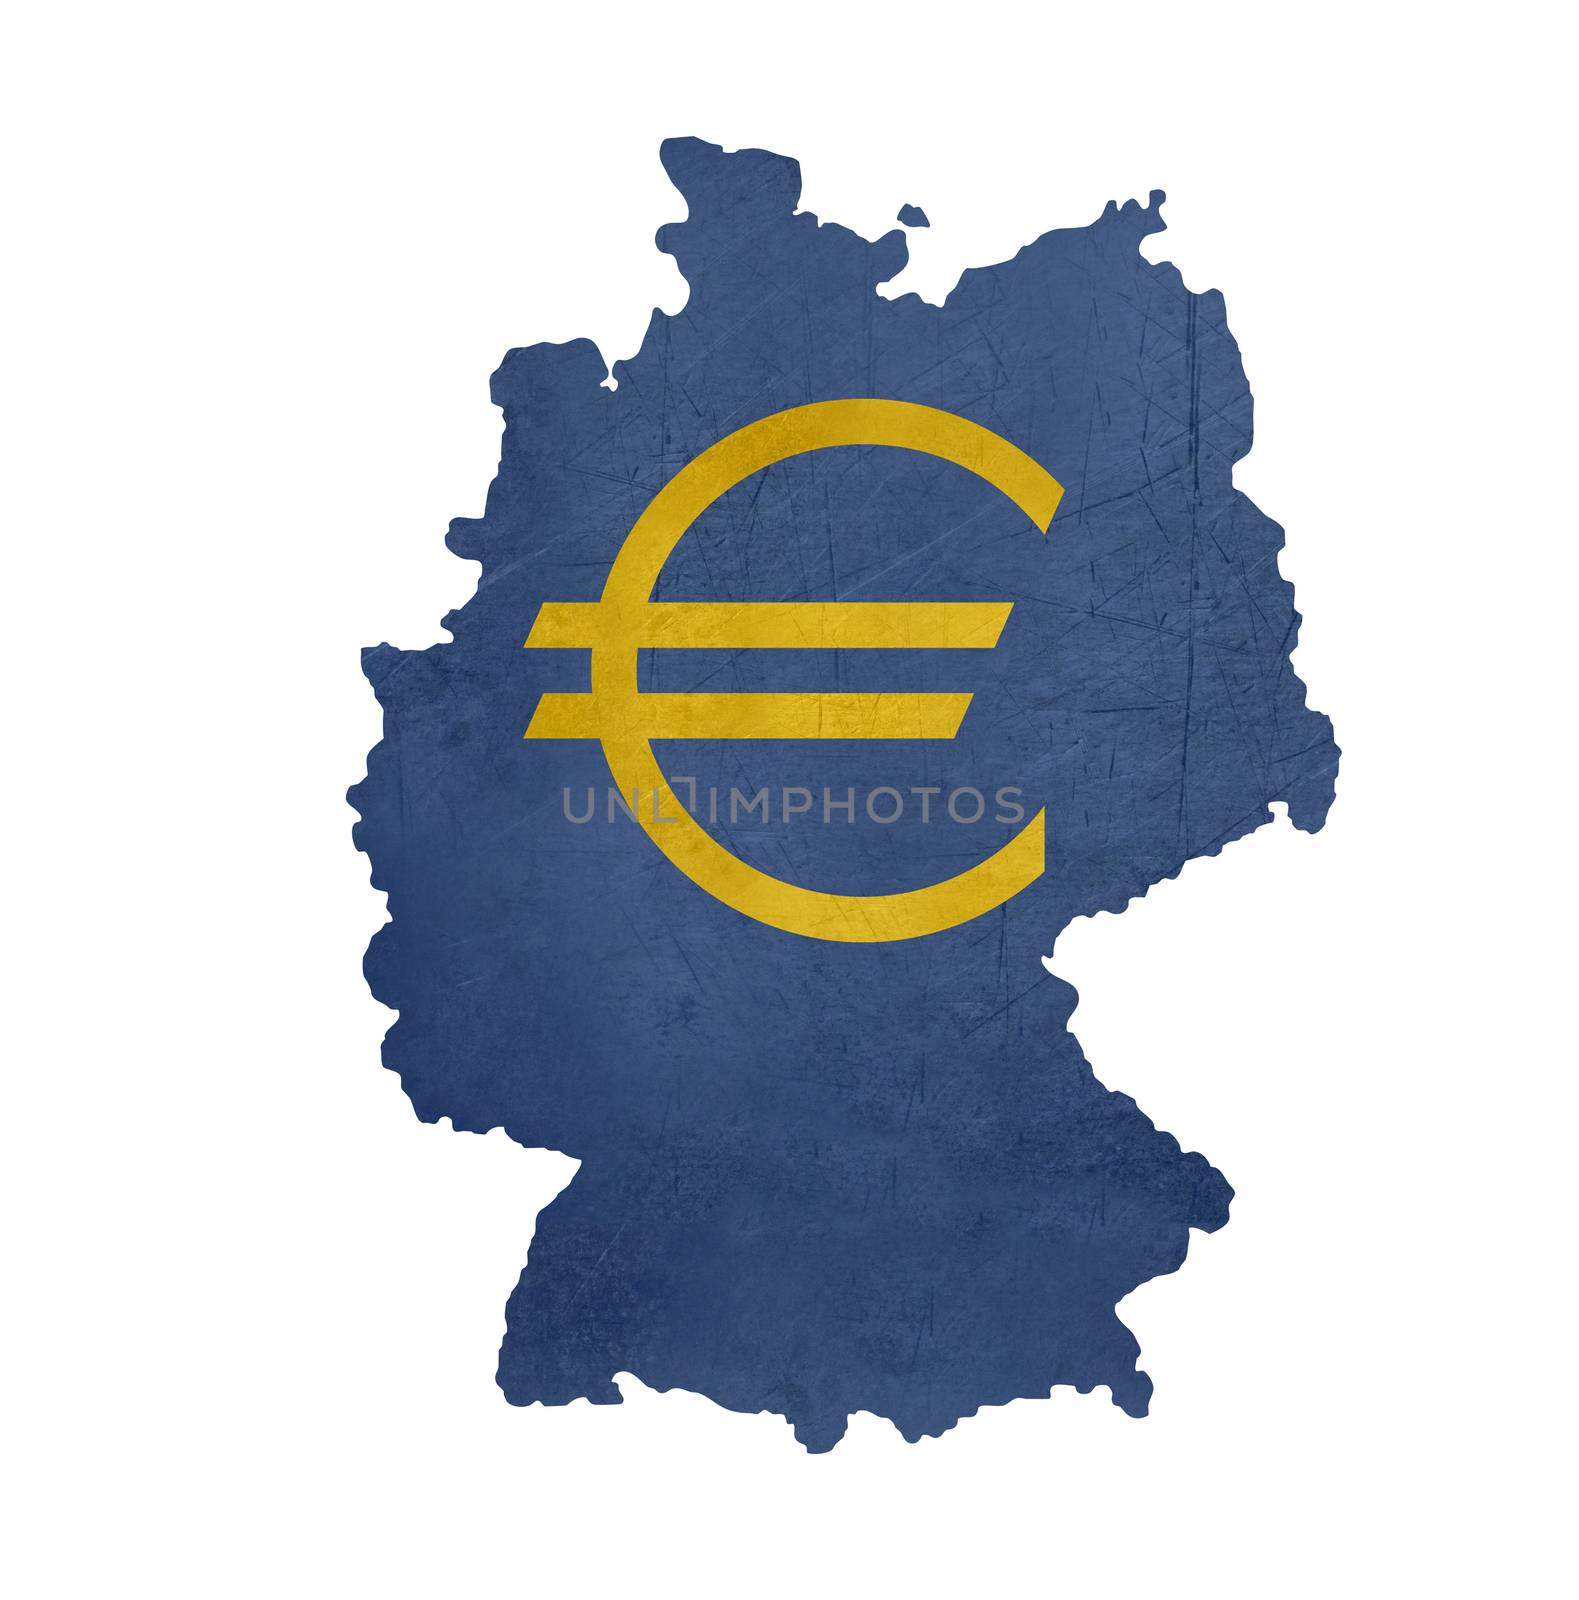 European currency symbol on map of Germany isolated on white background.